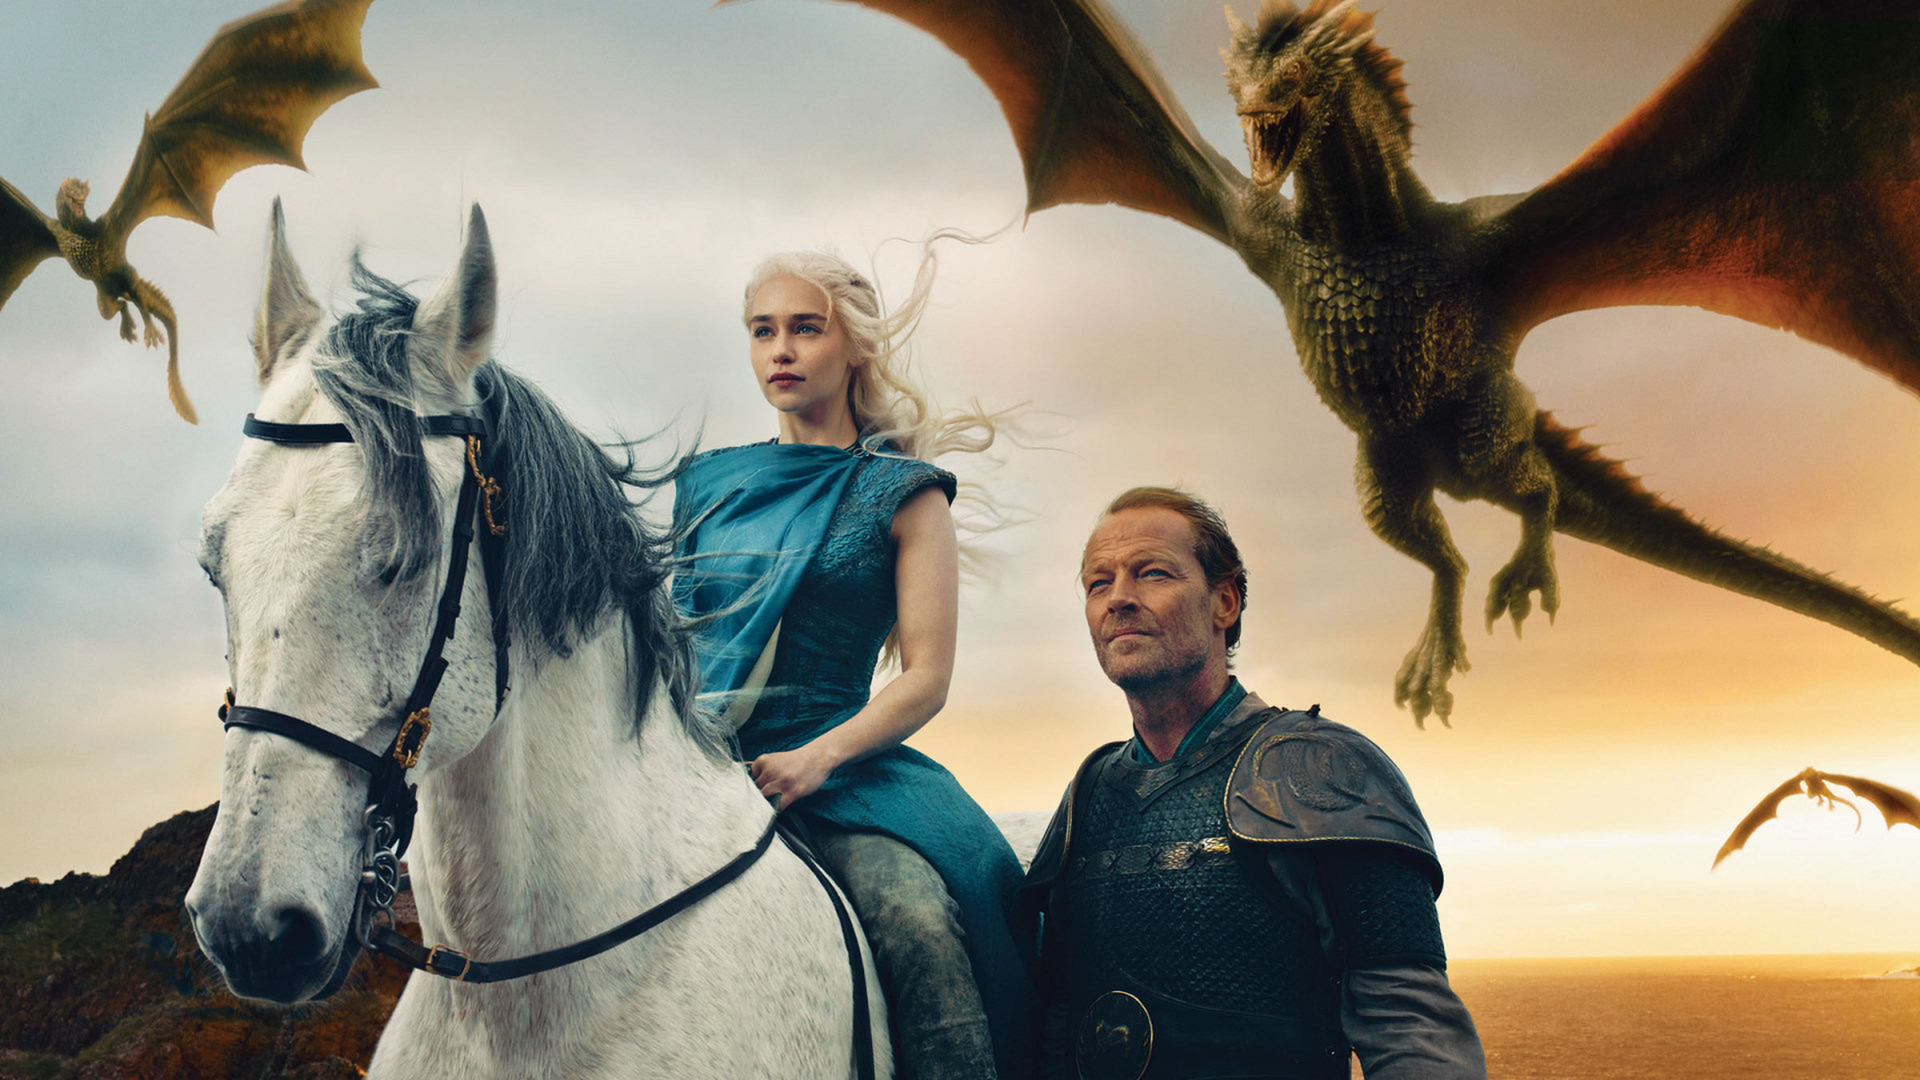 7 life lessons from Game of Thrones that ACTV powered by 05Media already applies